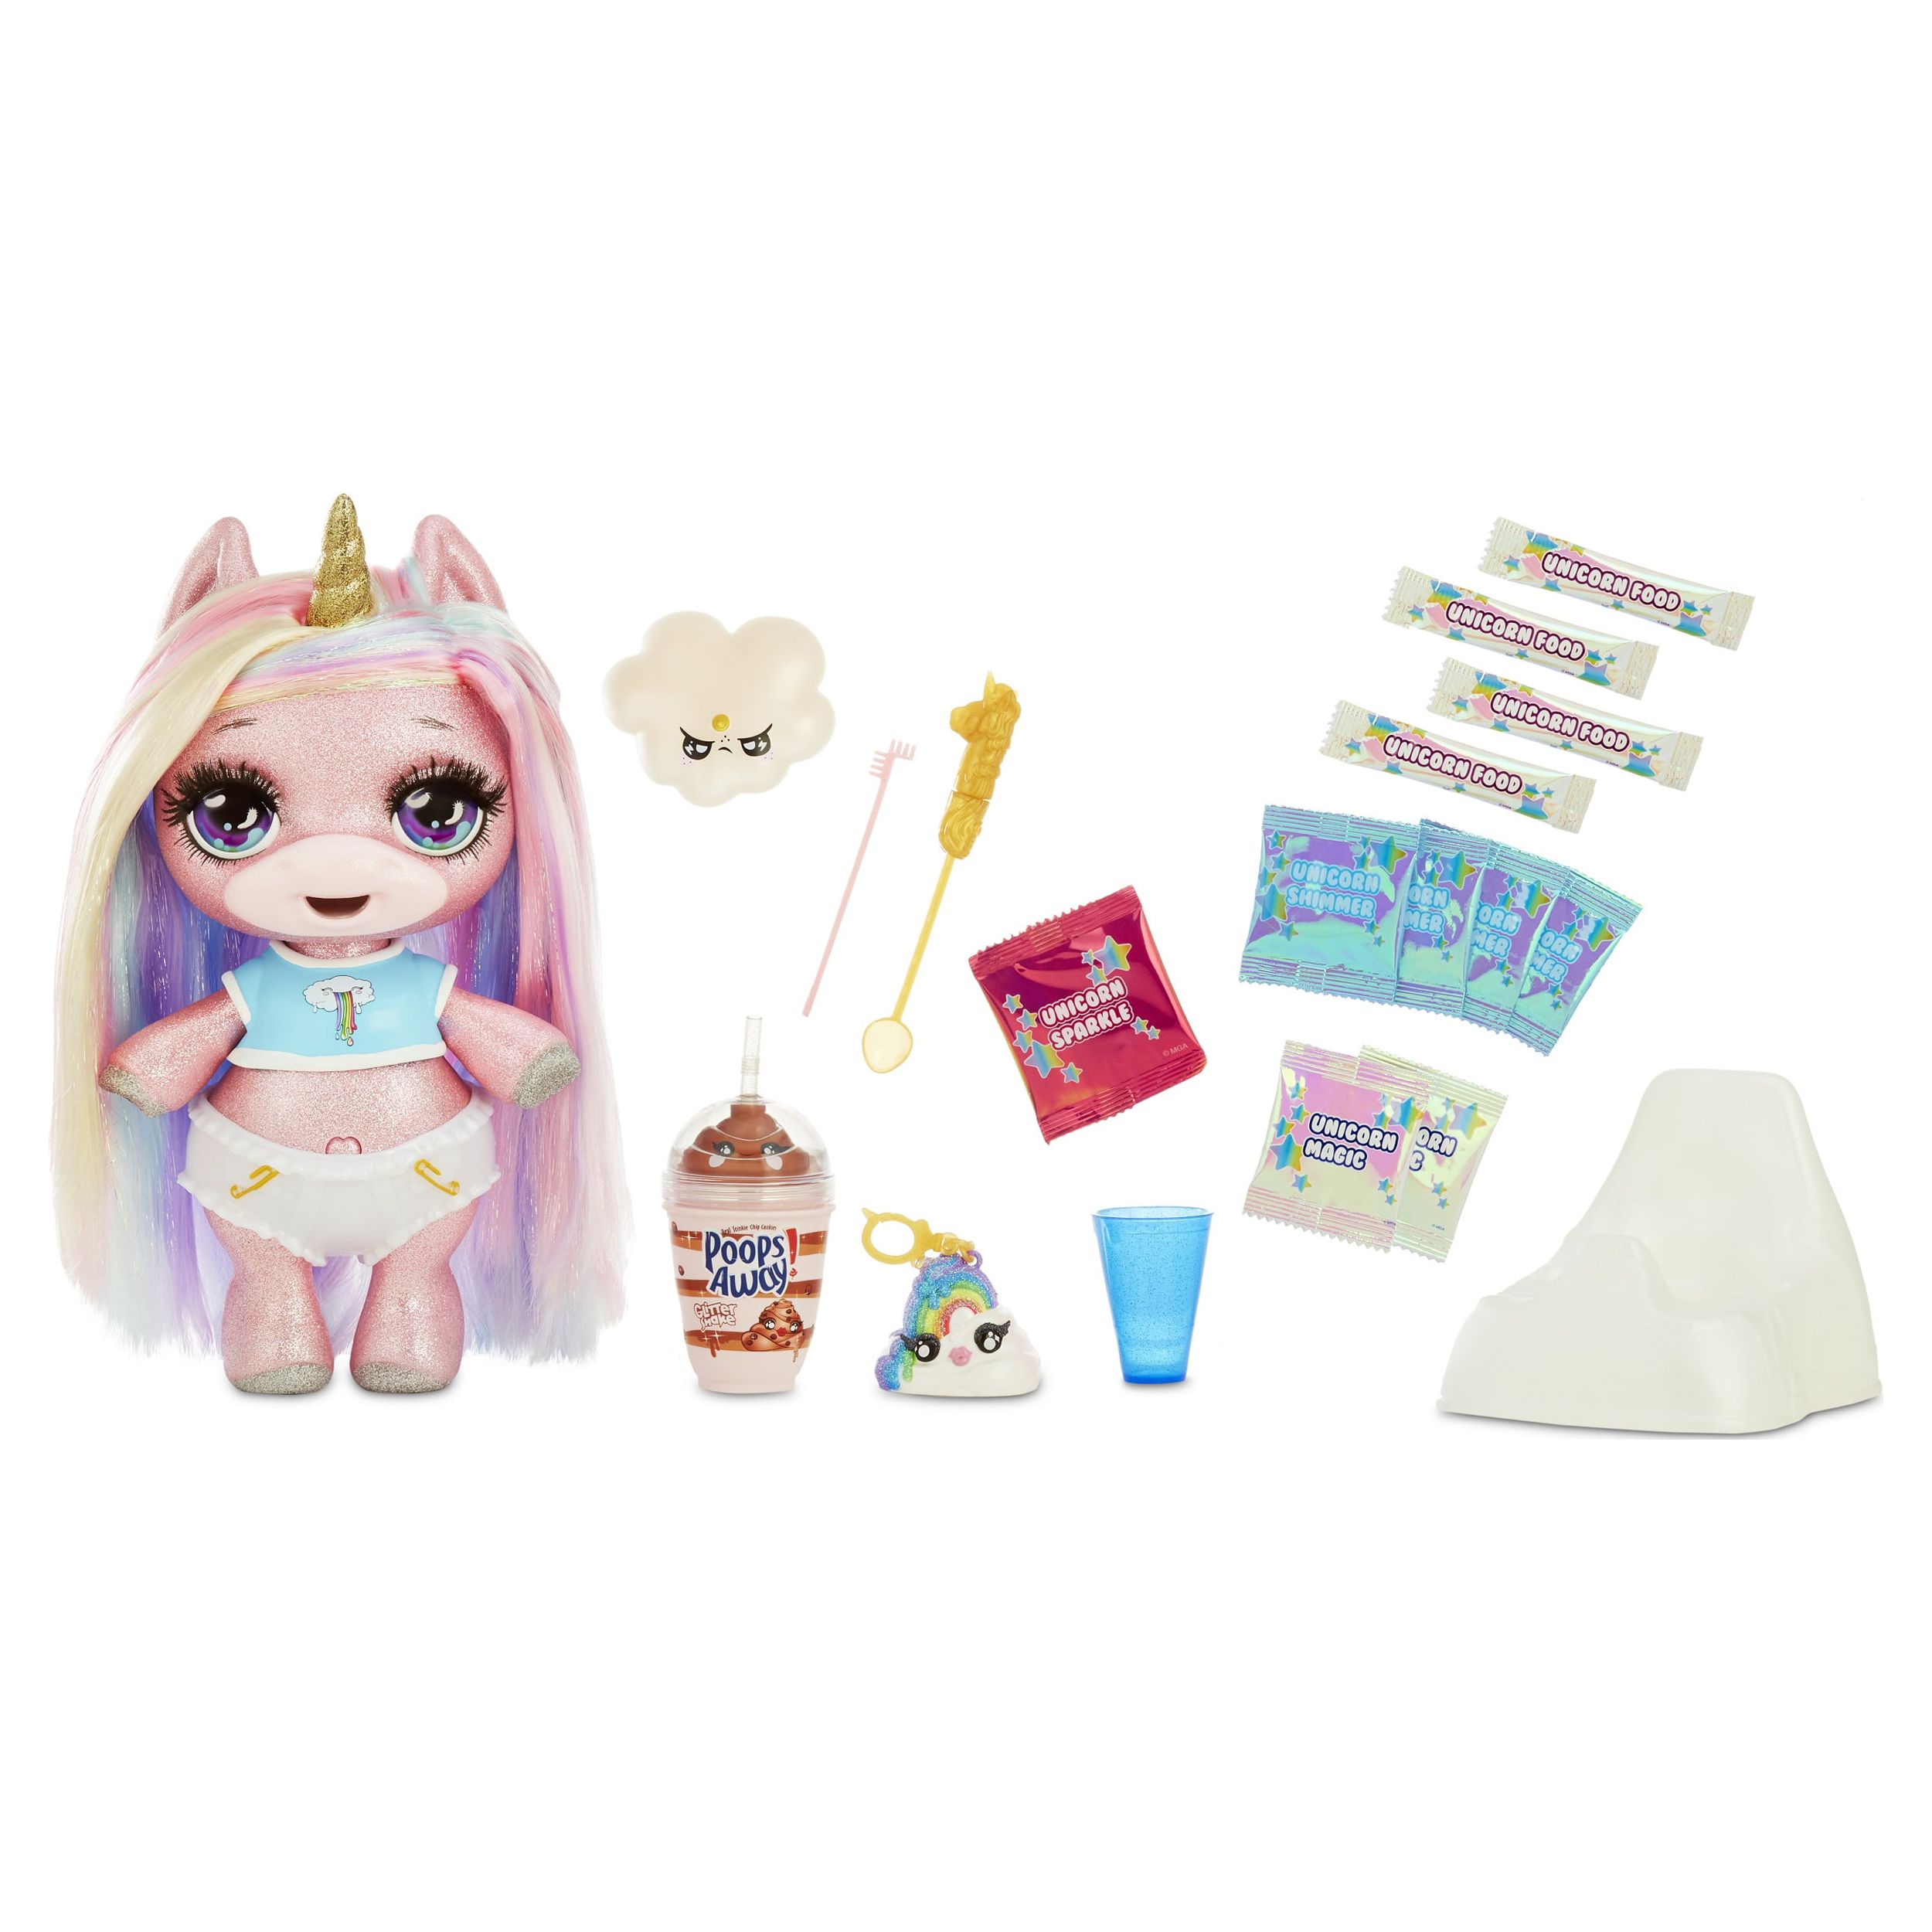 Poopsie Slime Surprise Glitter Unicorn: Stardust Sparkle or Blingy Beauty, 12" Doll with 20+ Magical Surprises - image 1 of 6